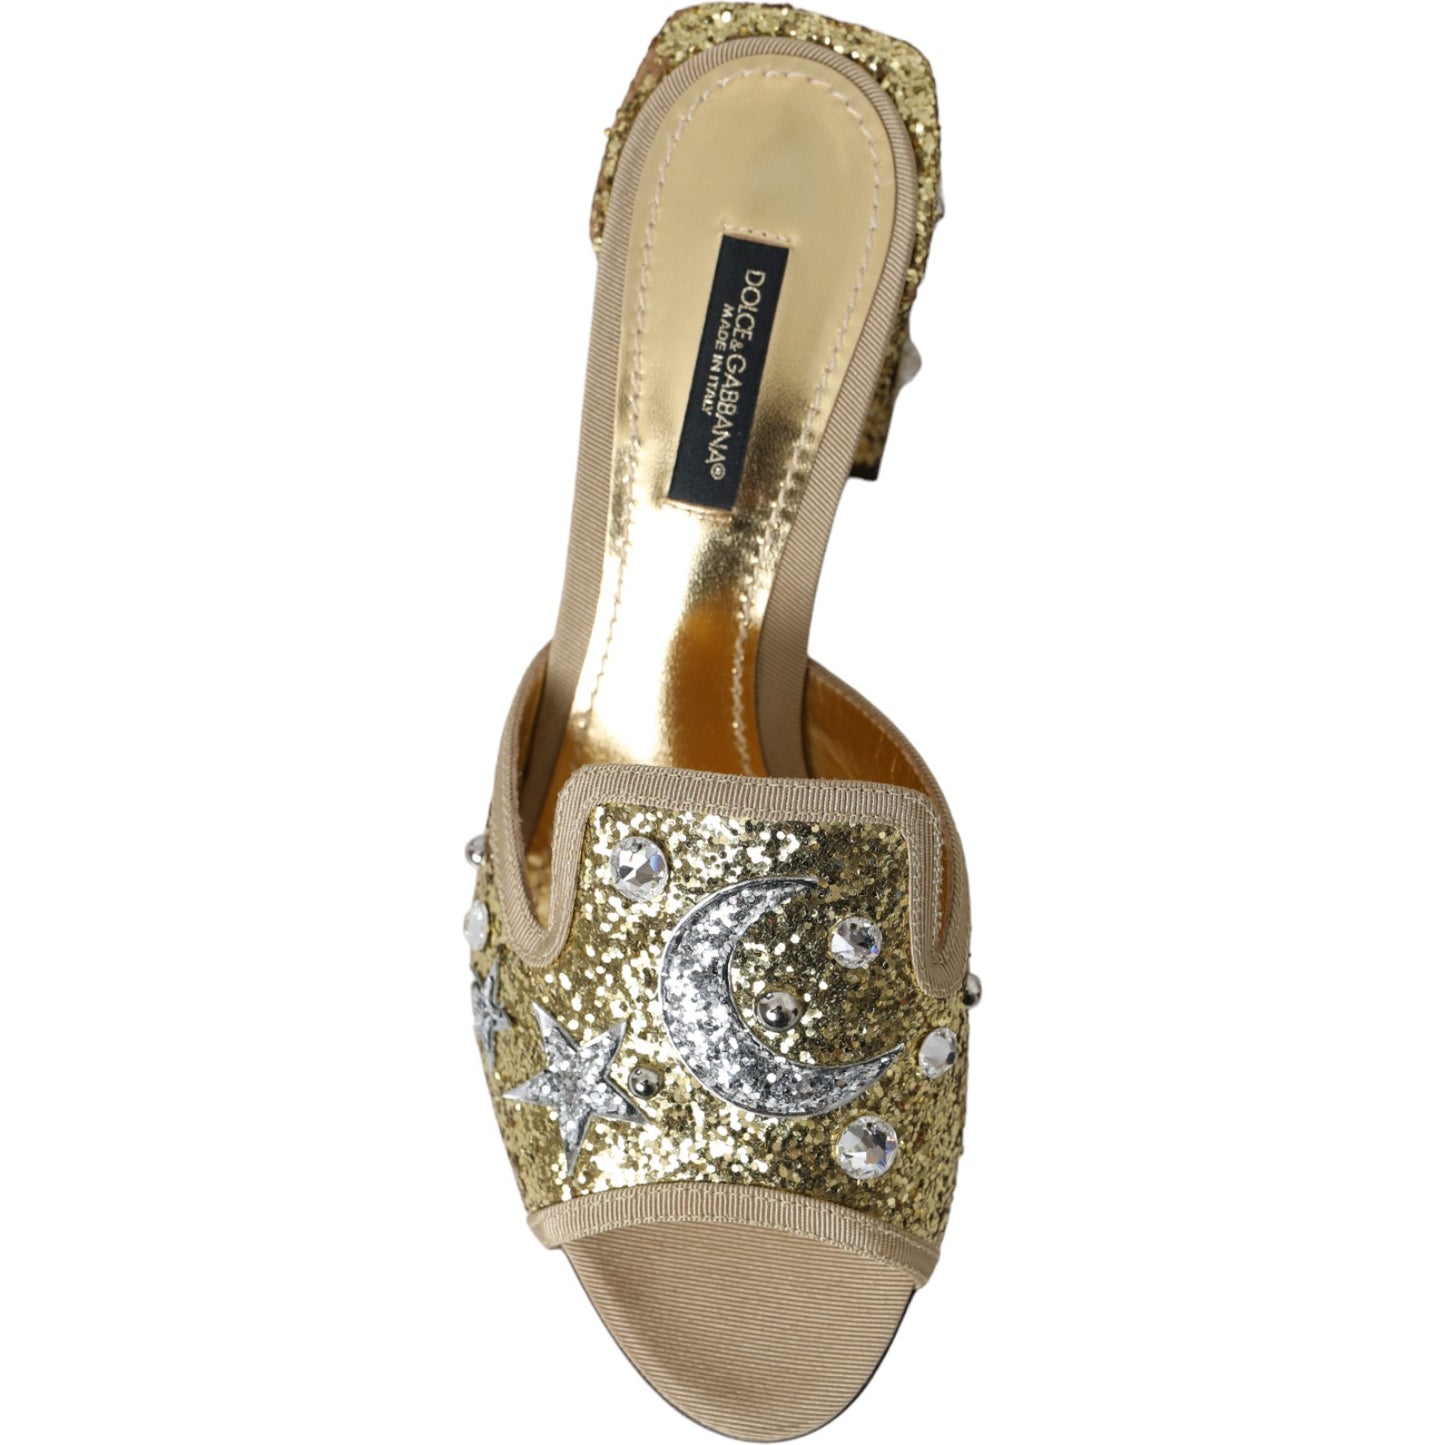 Gold Sequin Leather Heels Sandals Shoes